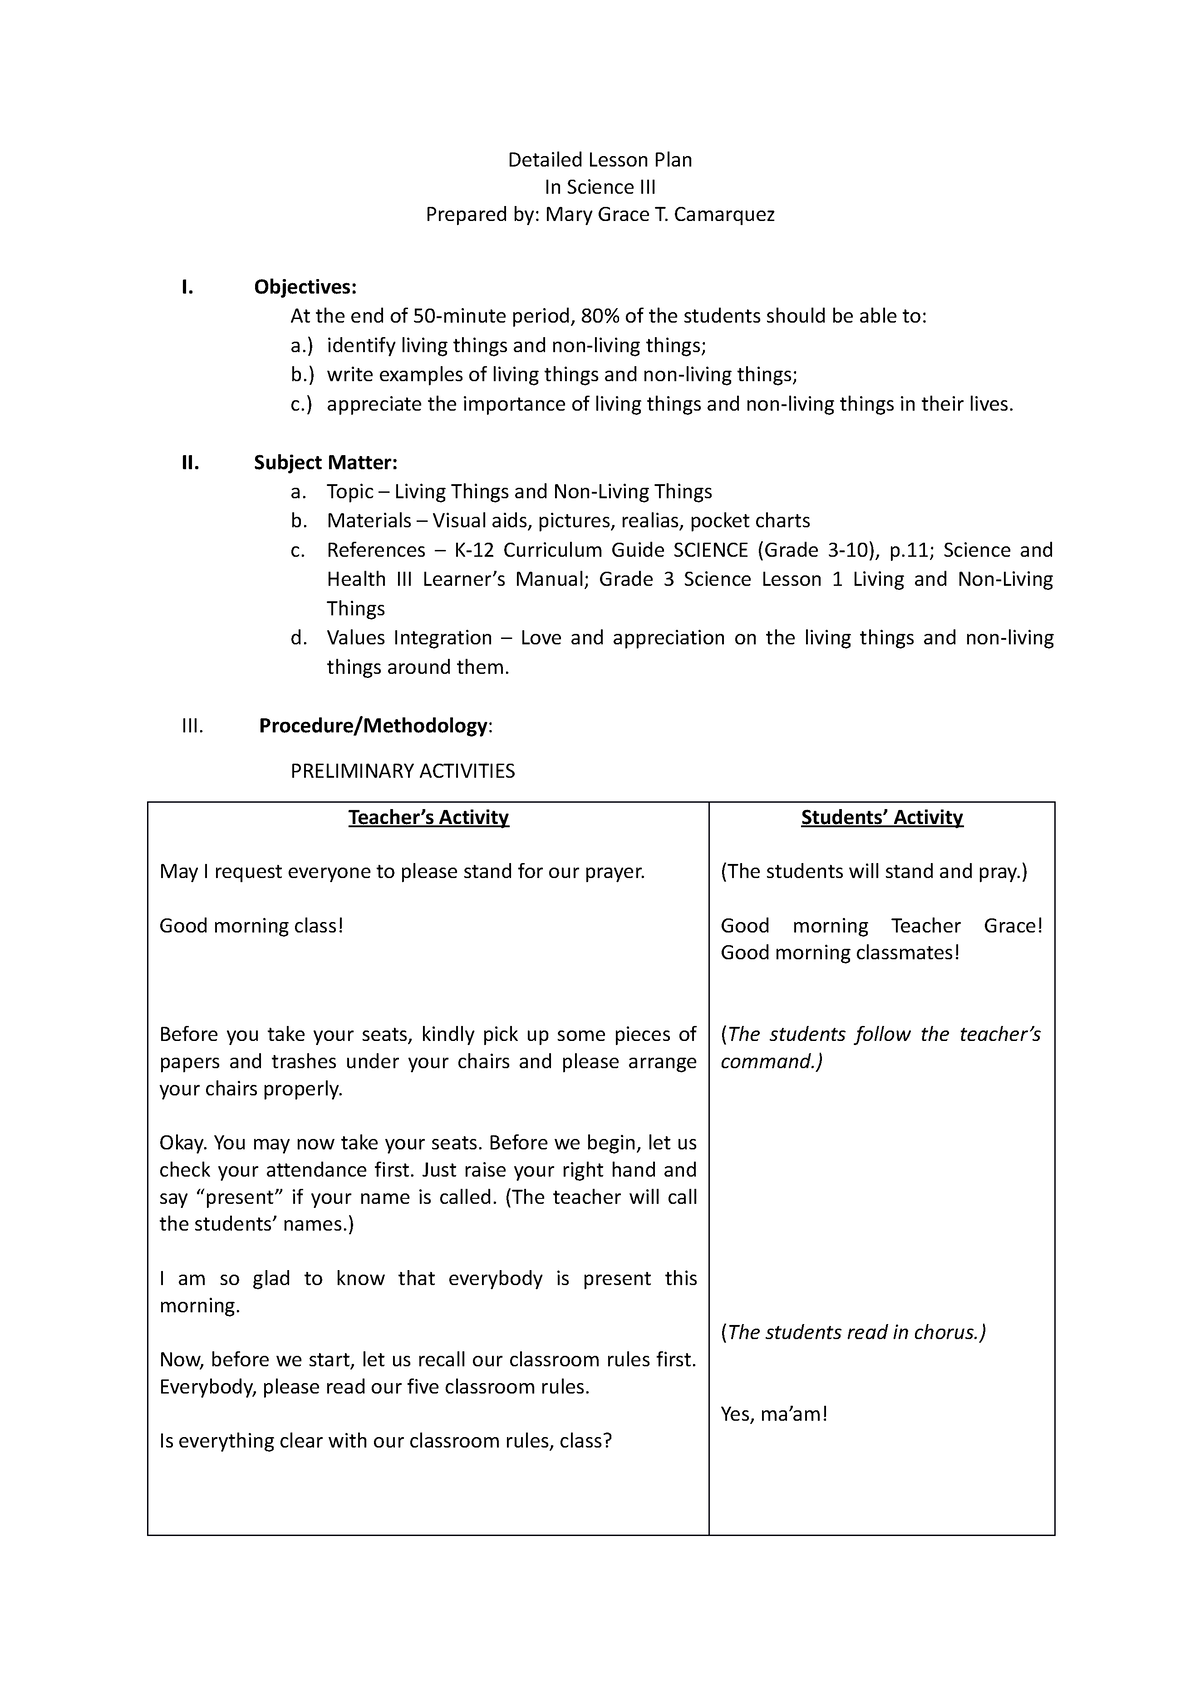 Detailed Lesson Plan - Camarquez I. Objectives: At the end of 50-minute ...